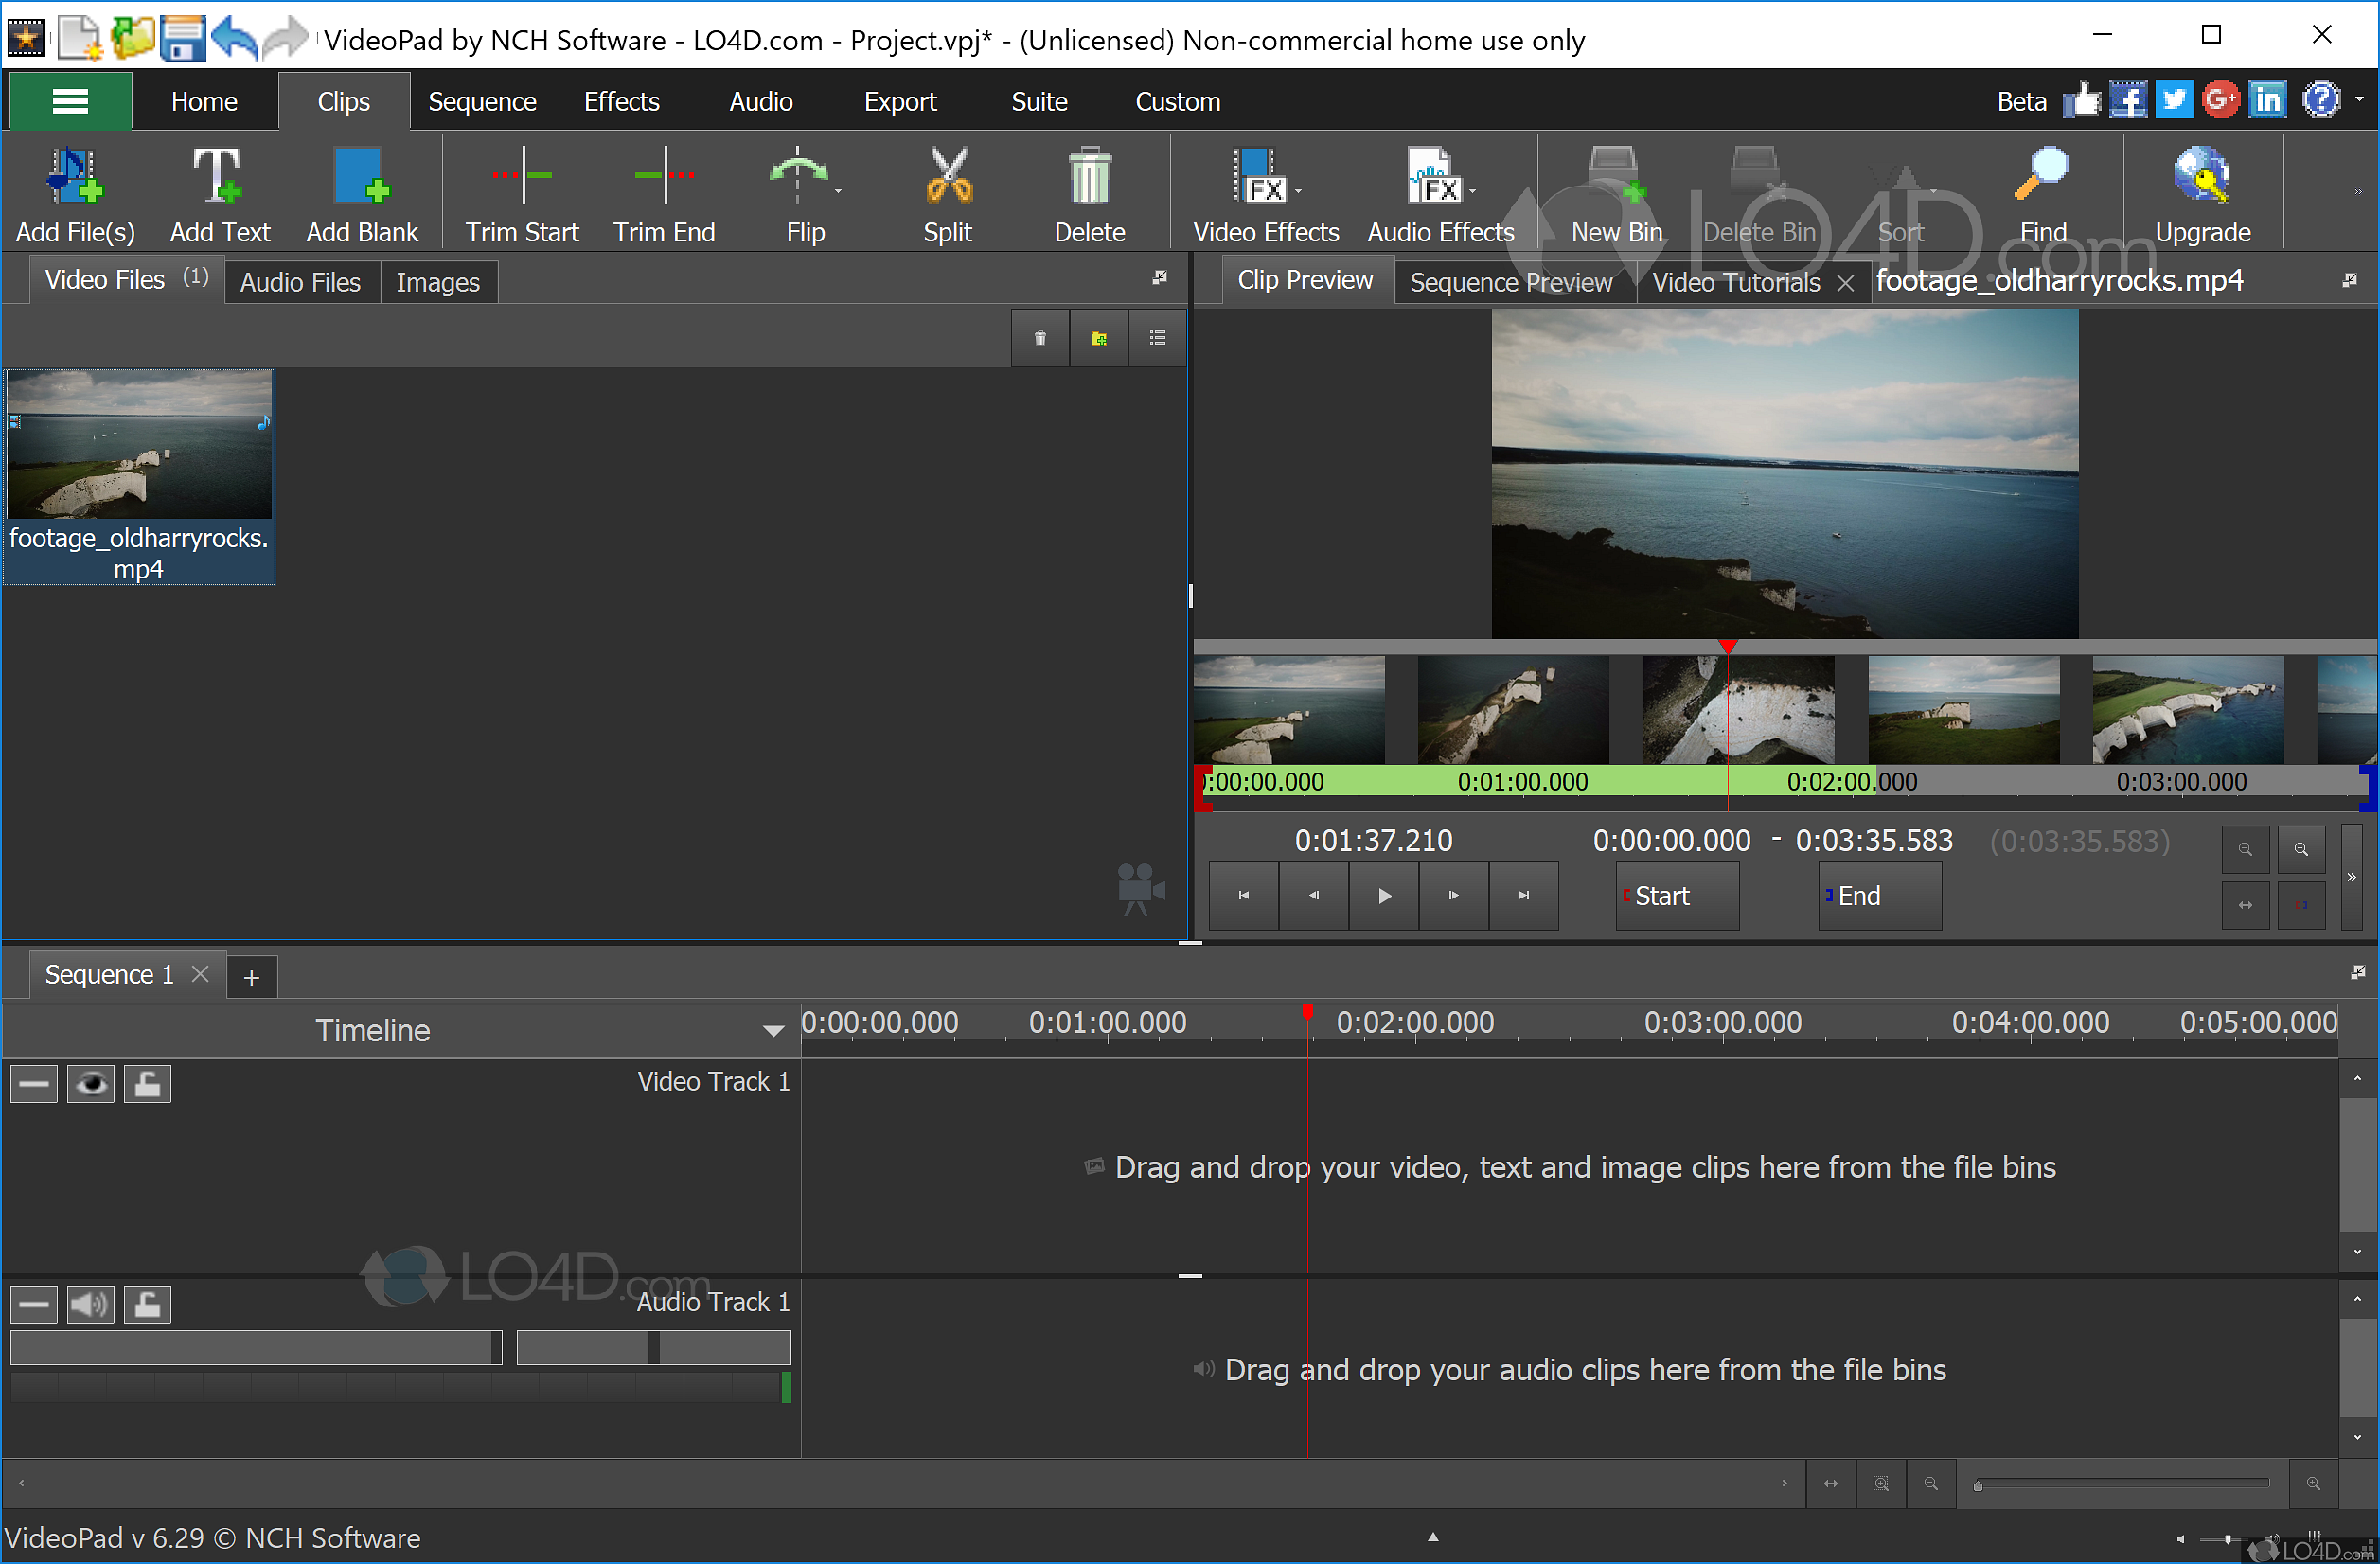 nch videopad video editor pro 4.48